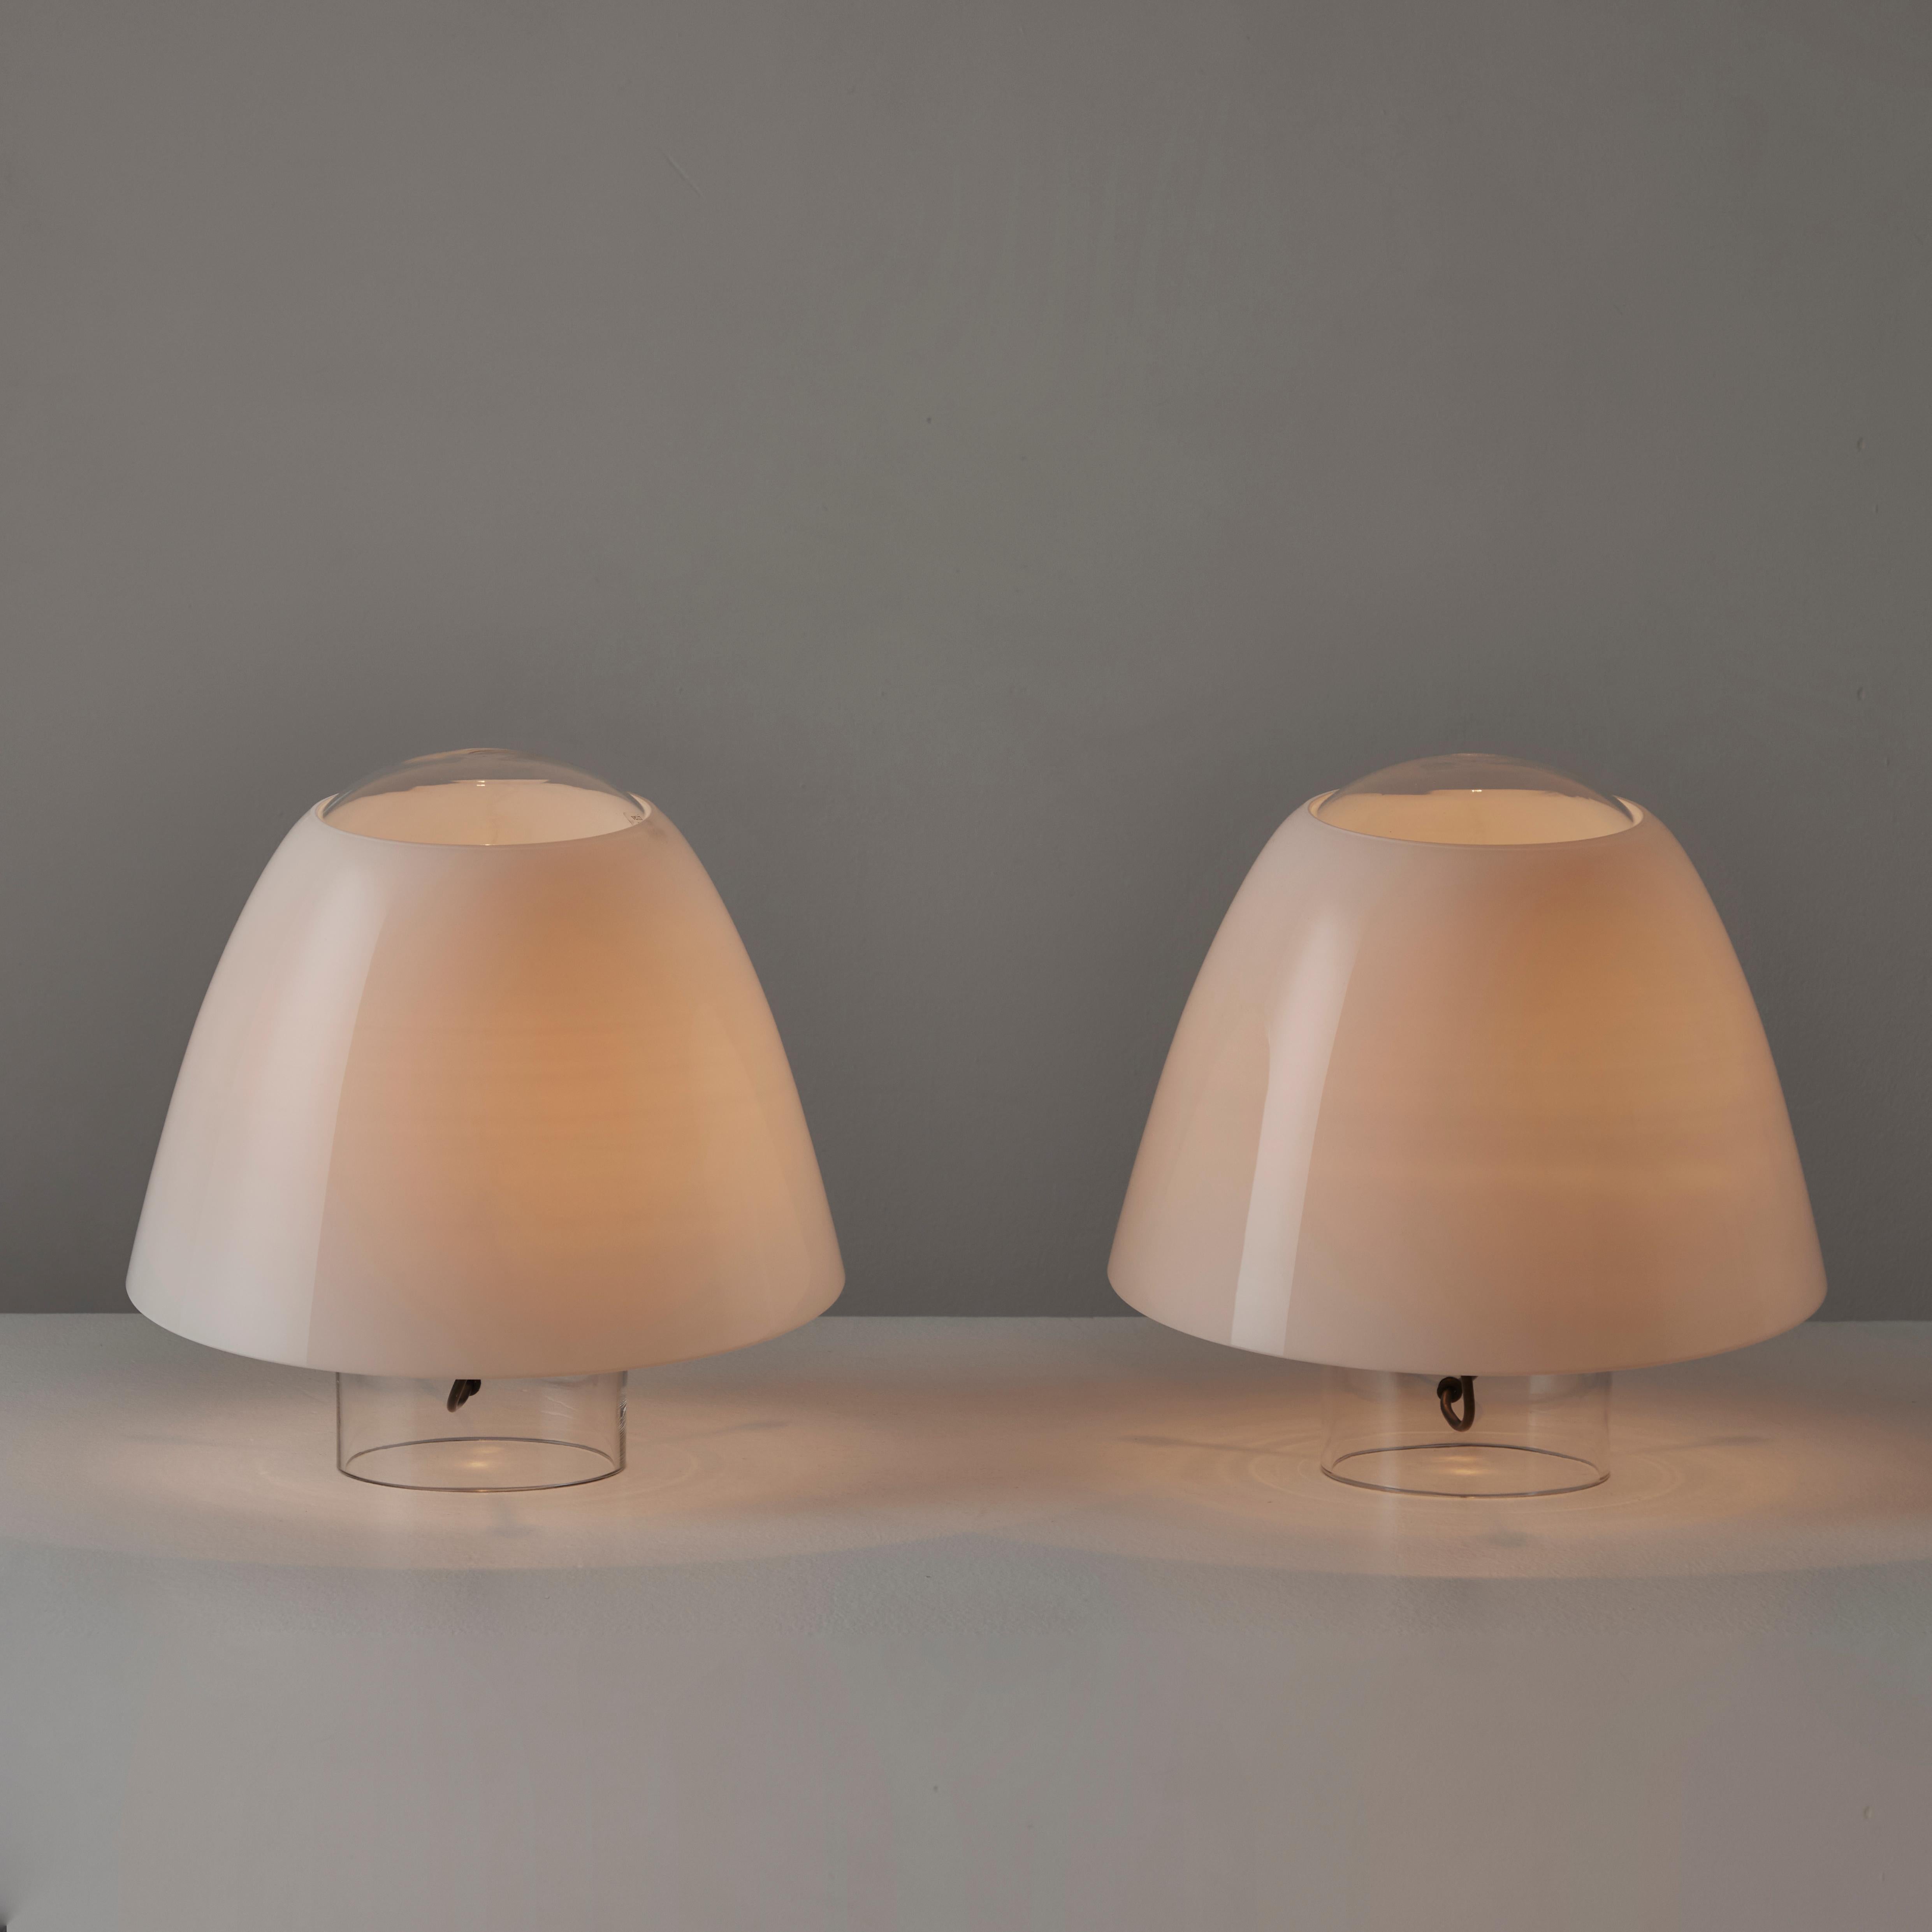 A Pair of XL Mod. 'Polluce' Table Lamps by Angelo Mangiarotti for Skipper. Designed and manufactuired in Italy, circa the 1960s. All glass table lamps comprising of a clear glass hand blown base, topped with a white opaline glass hat. The top hats